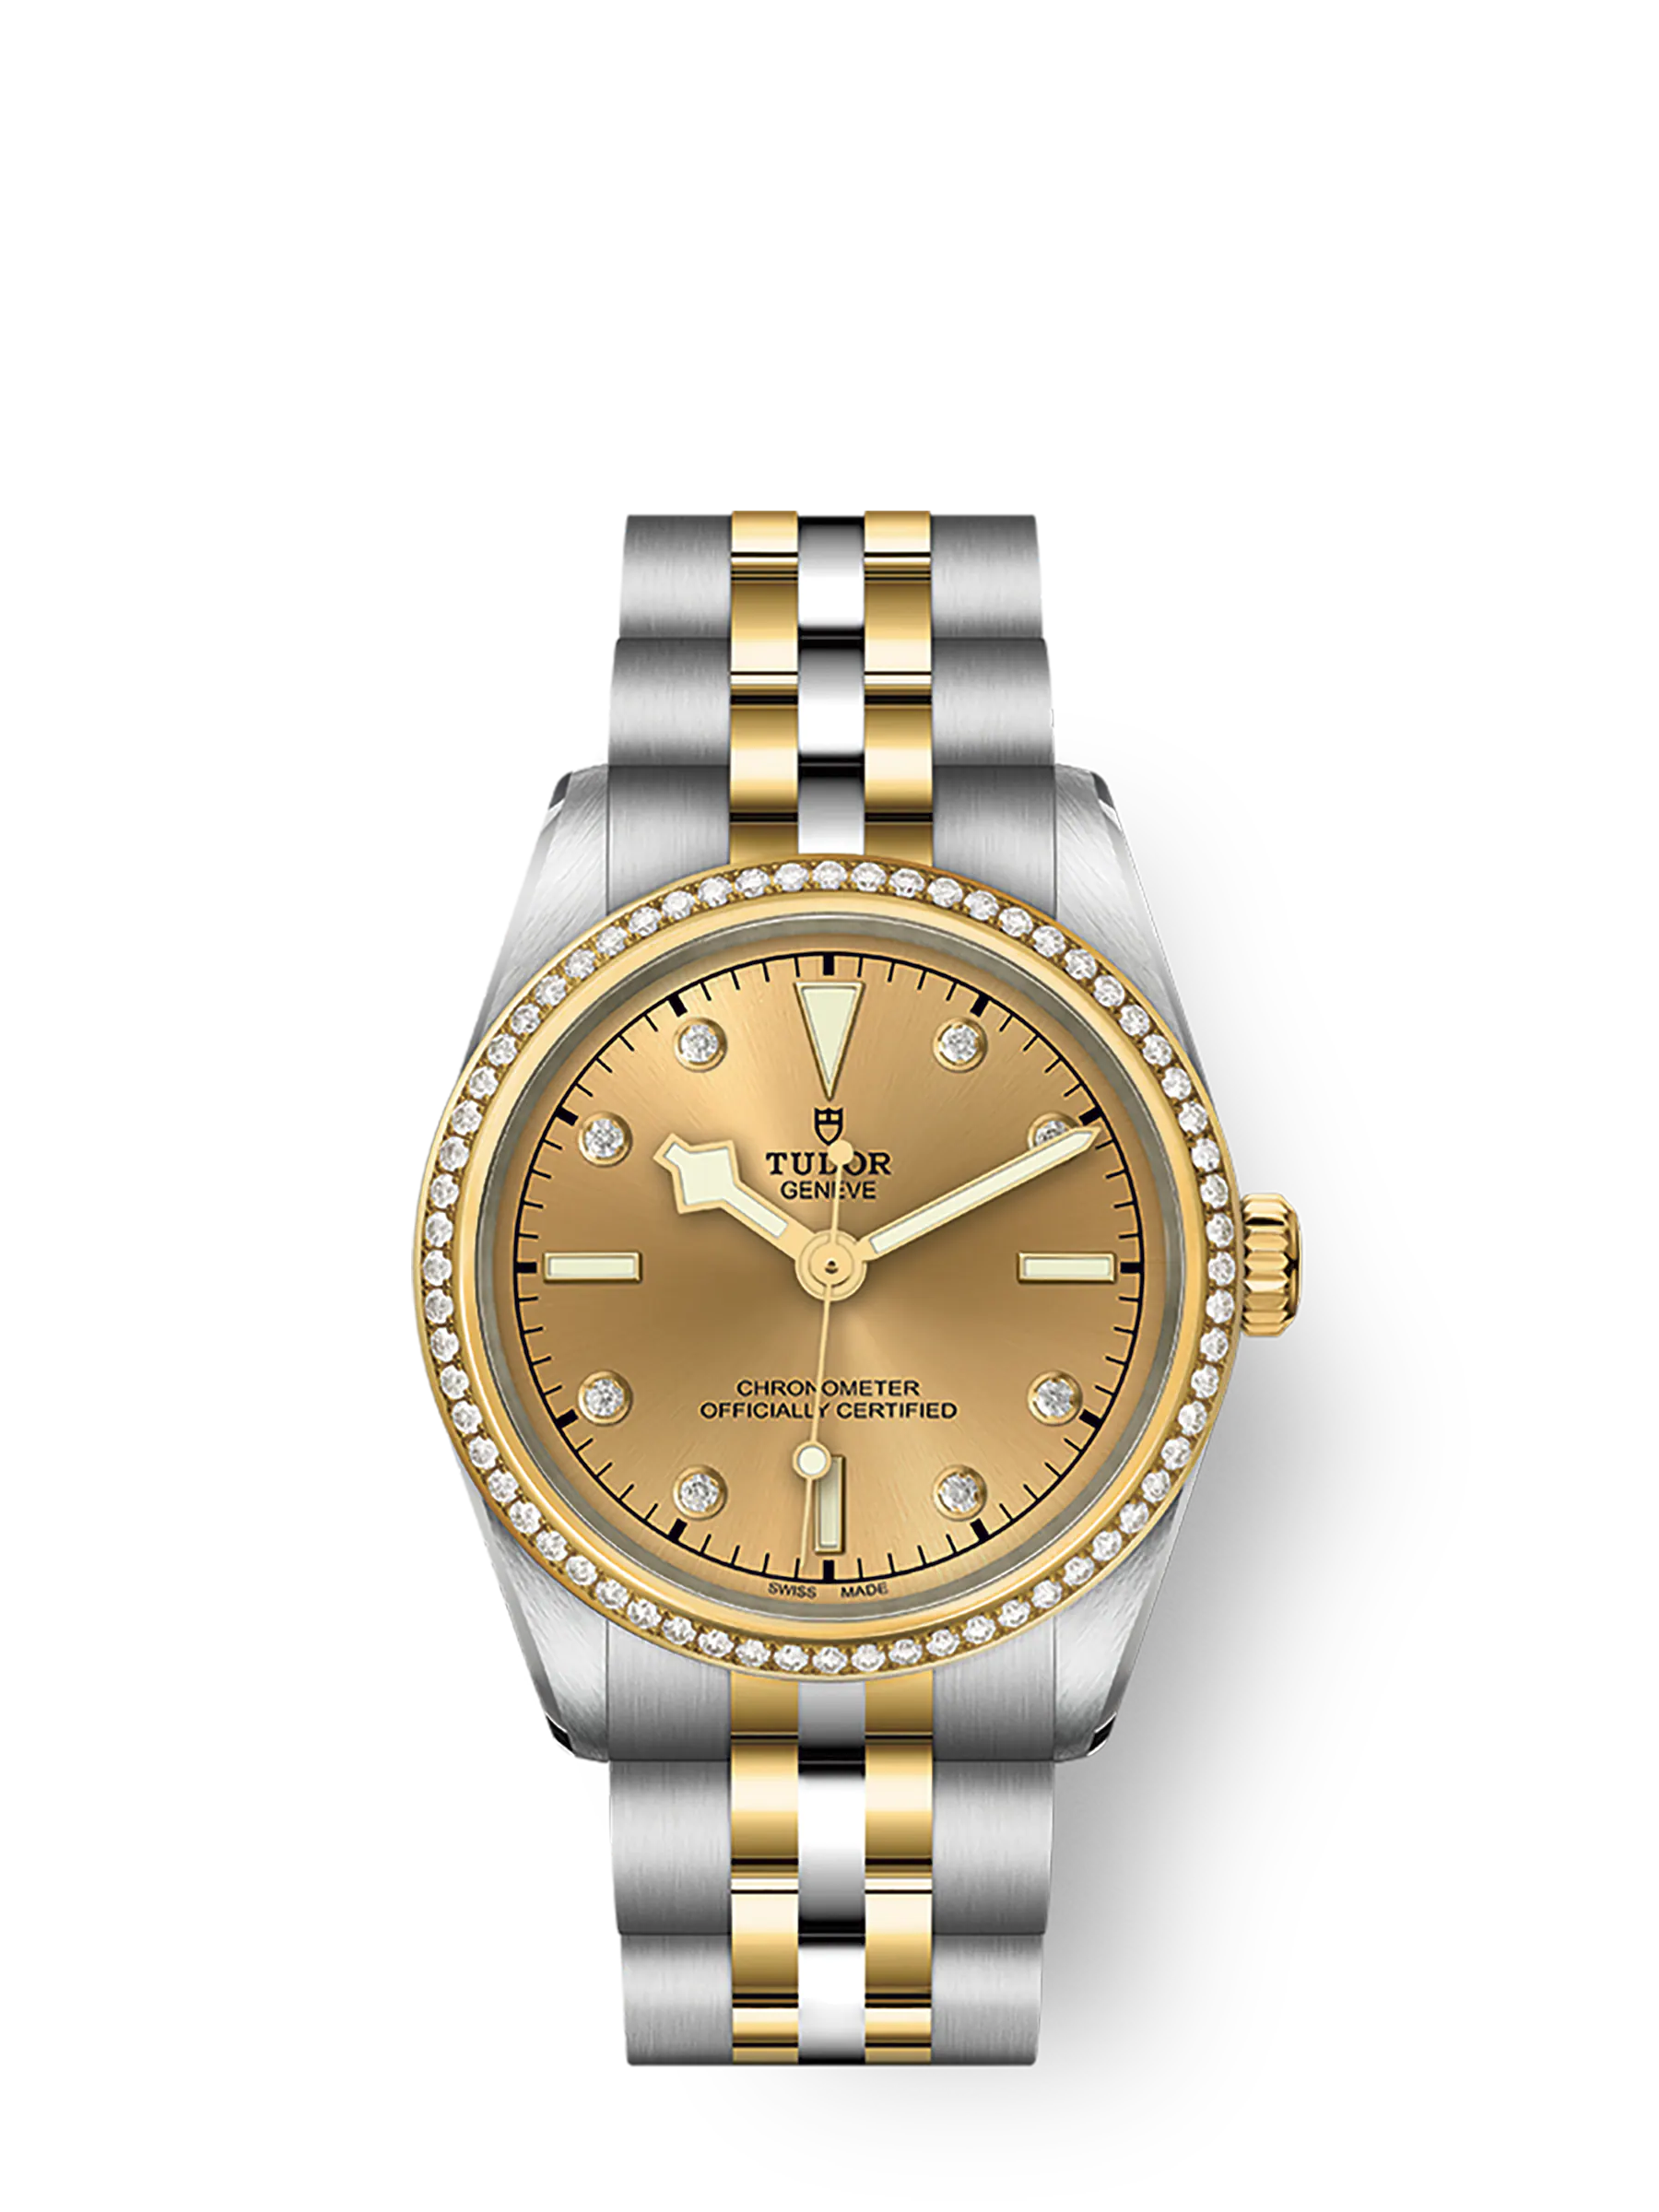 Tudor Black Bay 31 S&G, 316L Stainless Steel, 18k Yellow Gold and Diamonds, Ref# M79613-0007